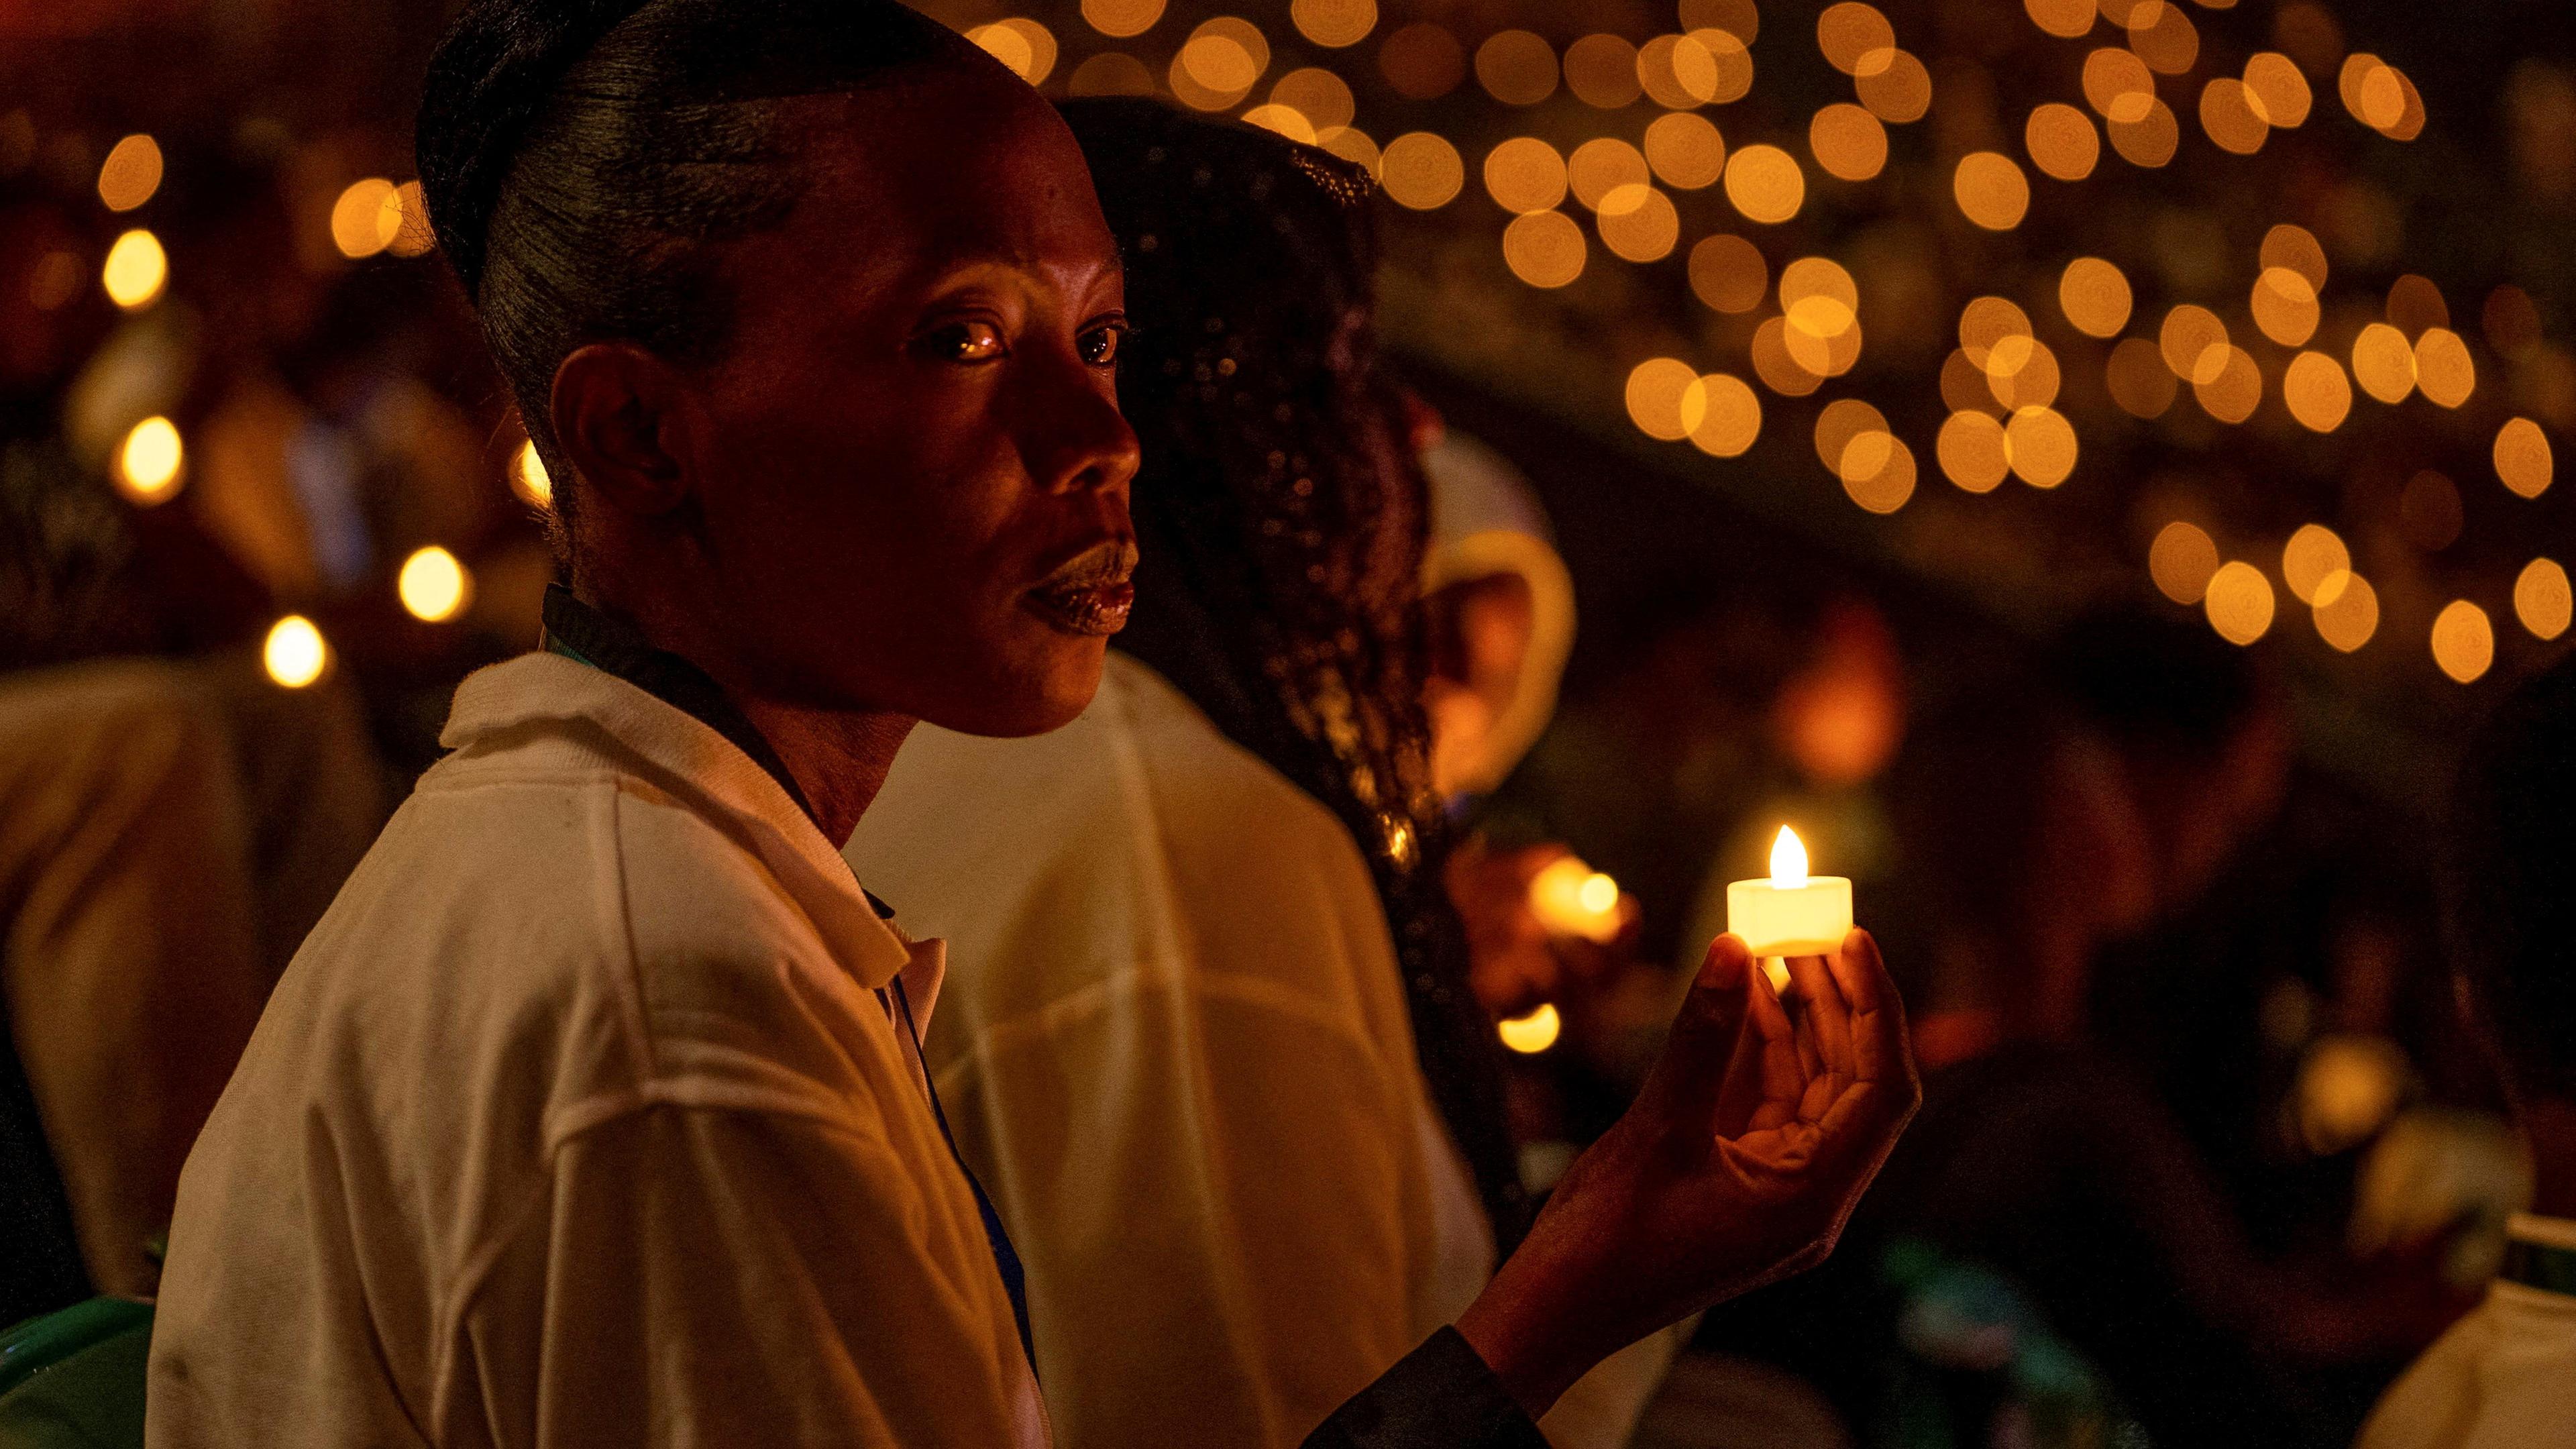 Rwanda marks the 30th anniversary of the 1994 Genocide, in Kigali